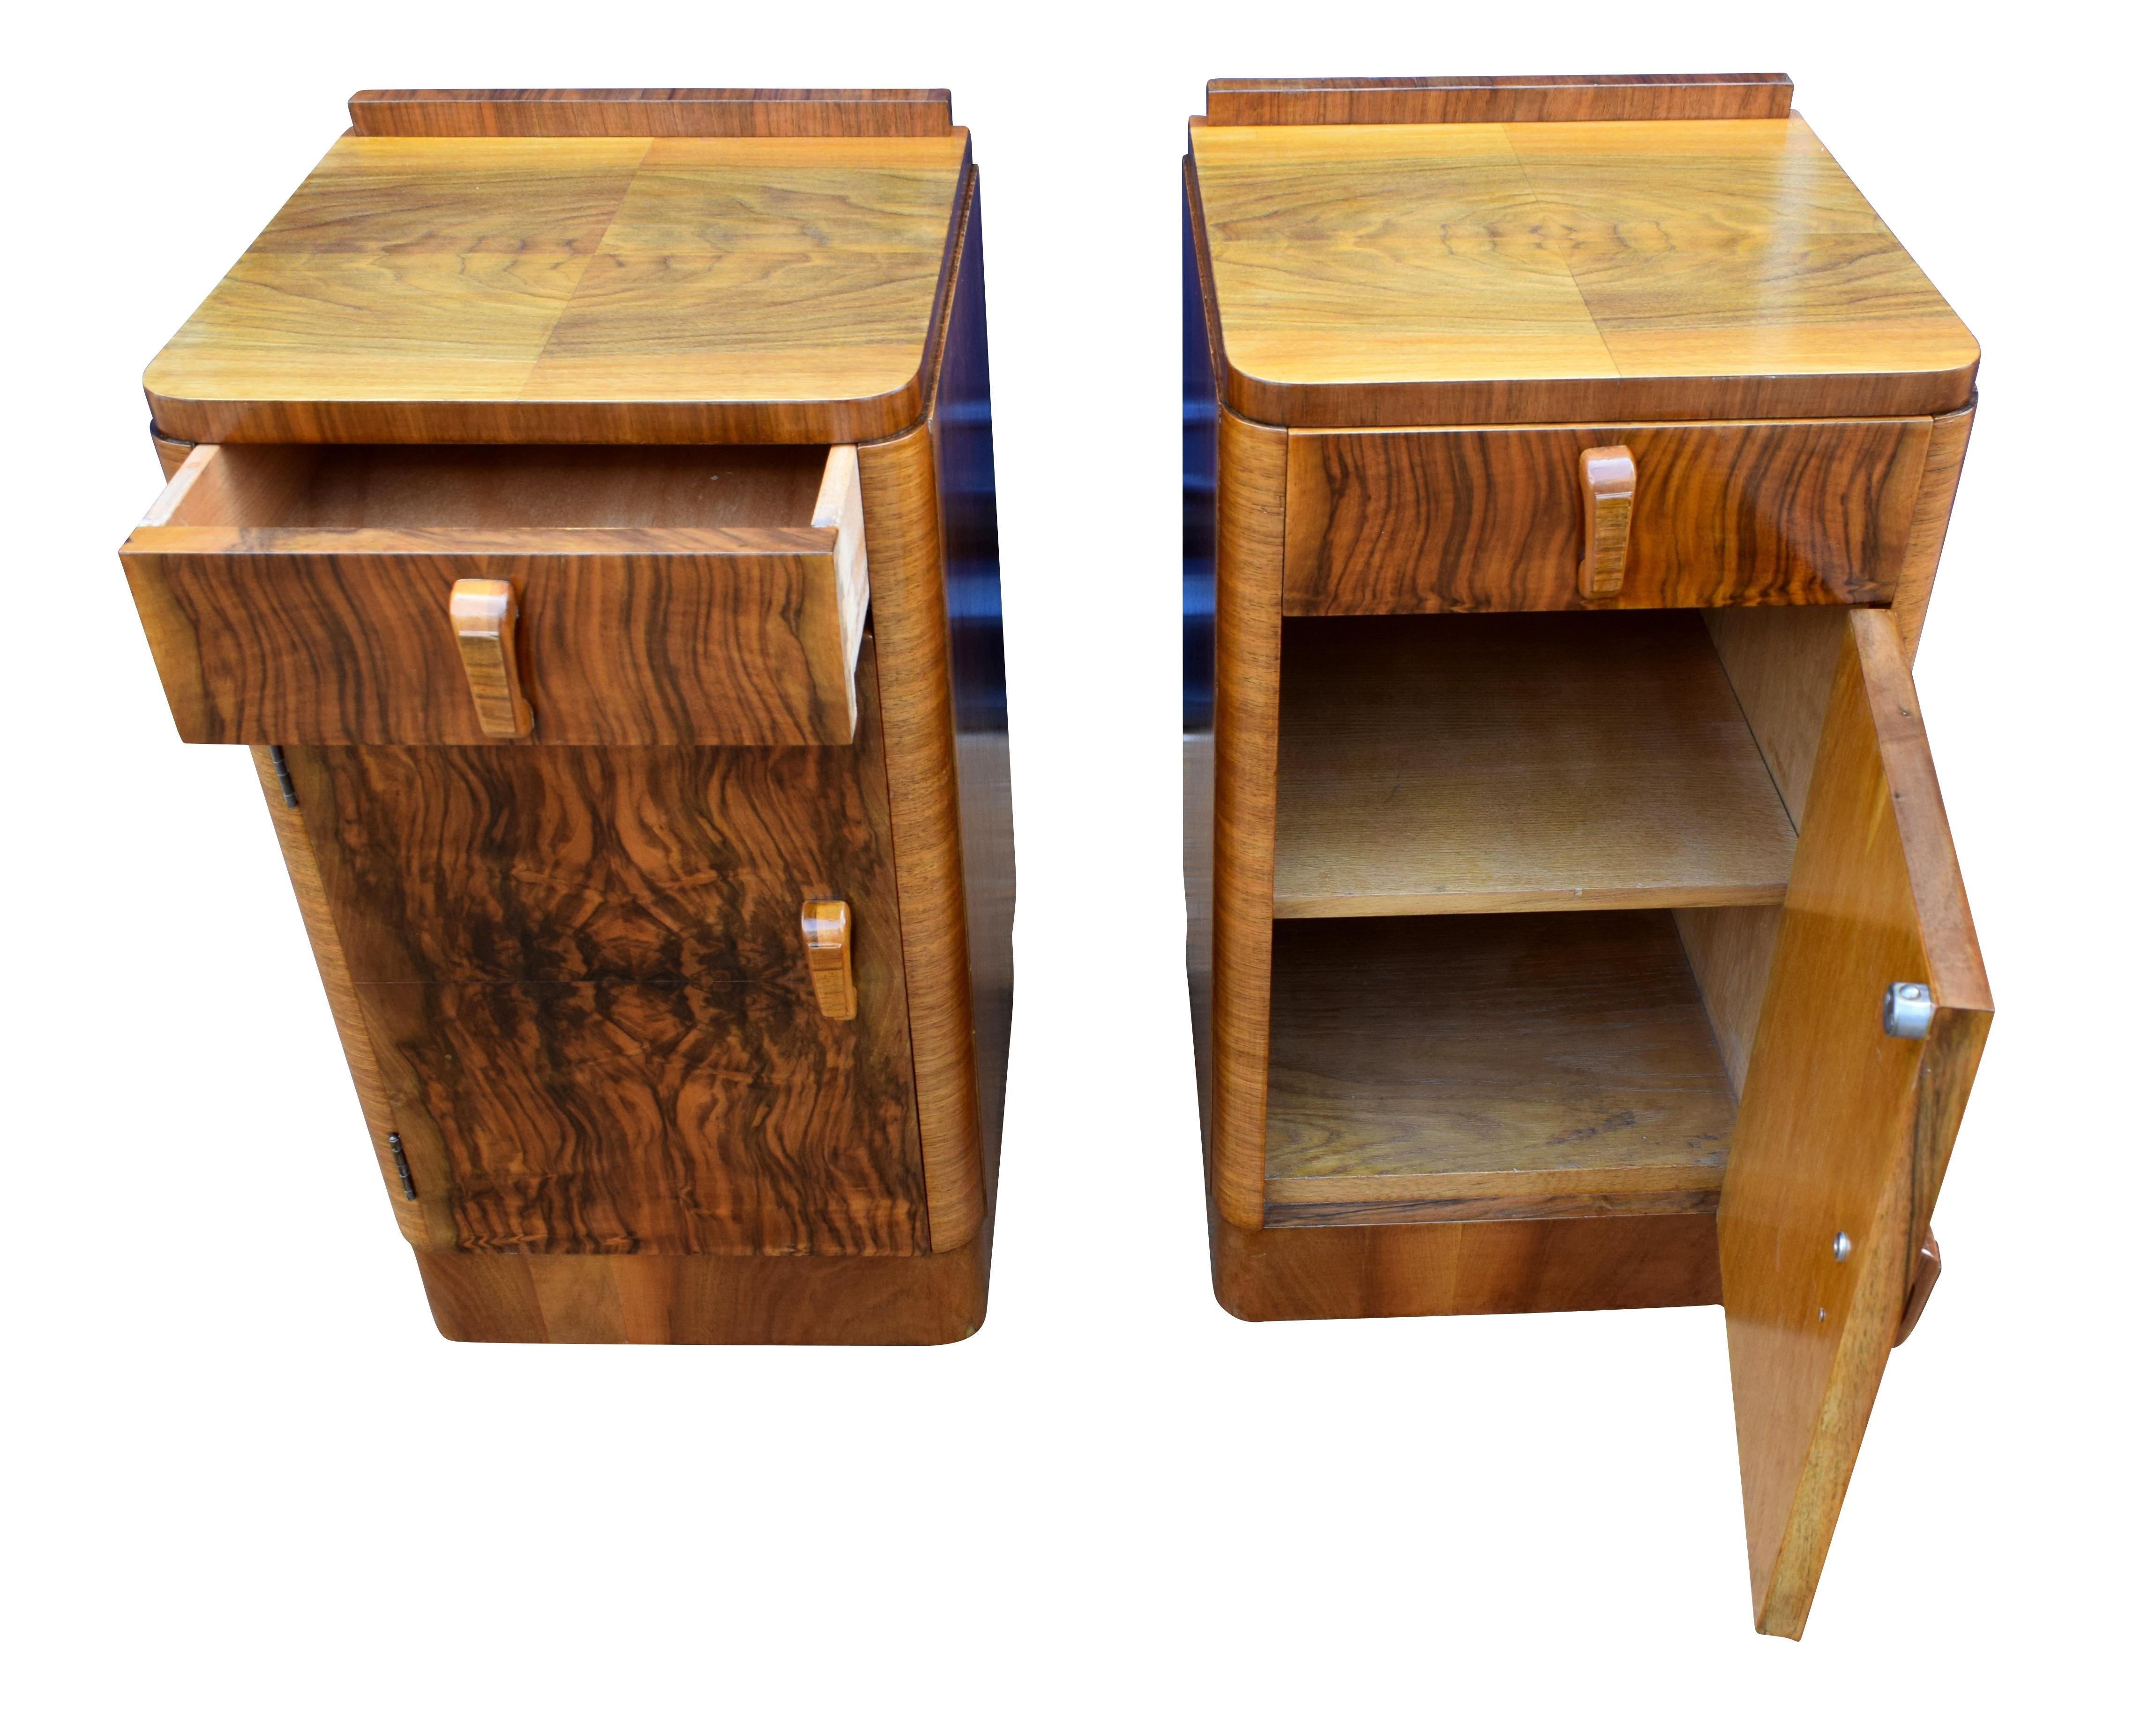 Fabulous pair of matching 1930s Art Deco bedside tables in heavily figured walnut veneer. Two generously sized internal storage areas. Each cabinet has a pullout / pull-out upper drawer which works effortlessly. We've had both cabinets fully and